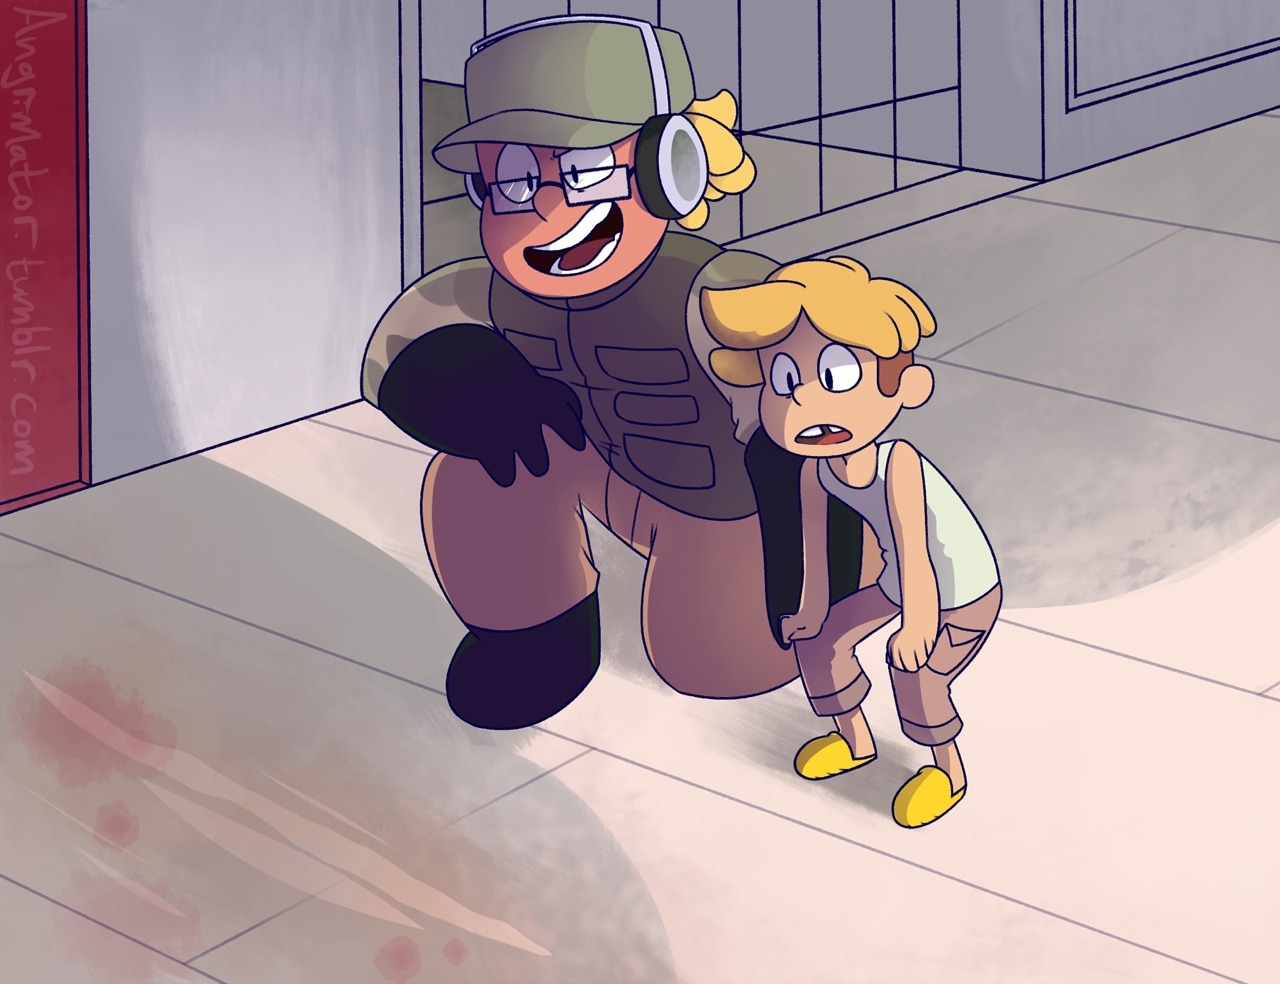 The frybros investigatin’ some mysterious stuff. I love the idea of them working together.